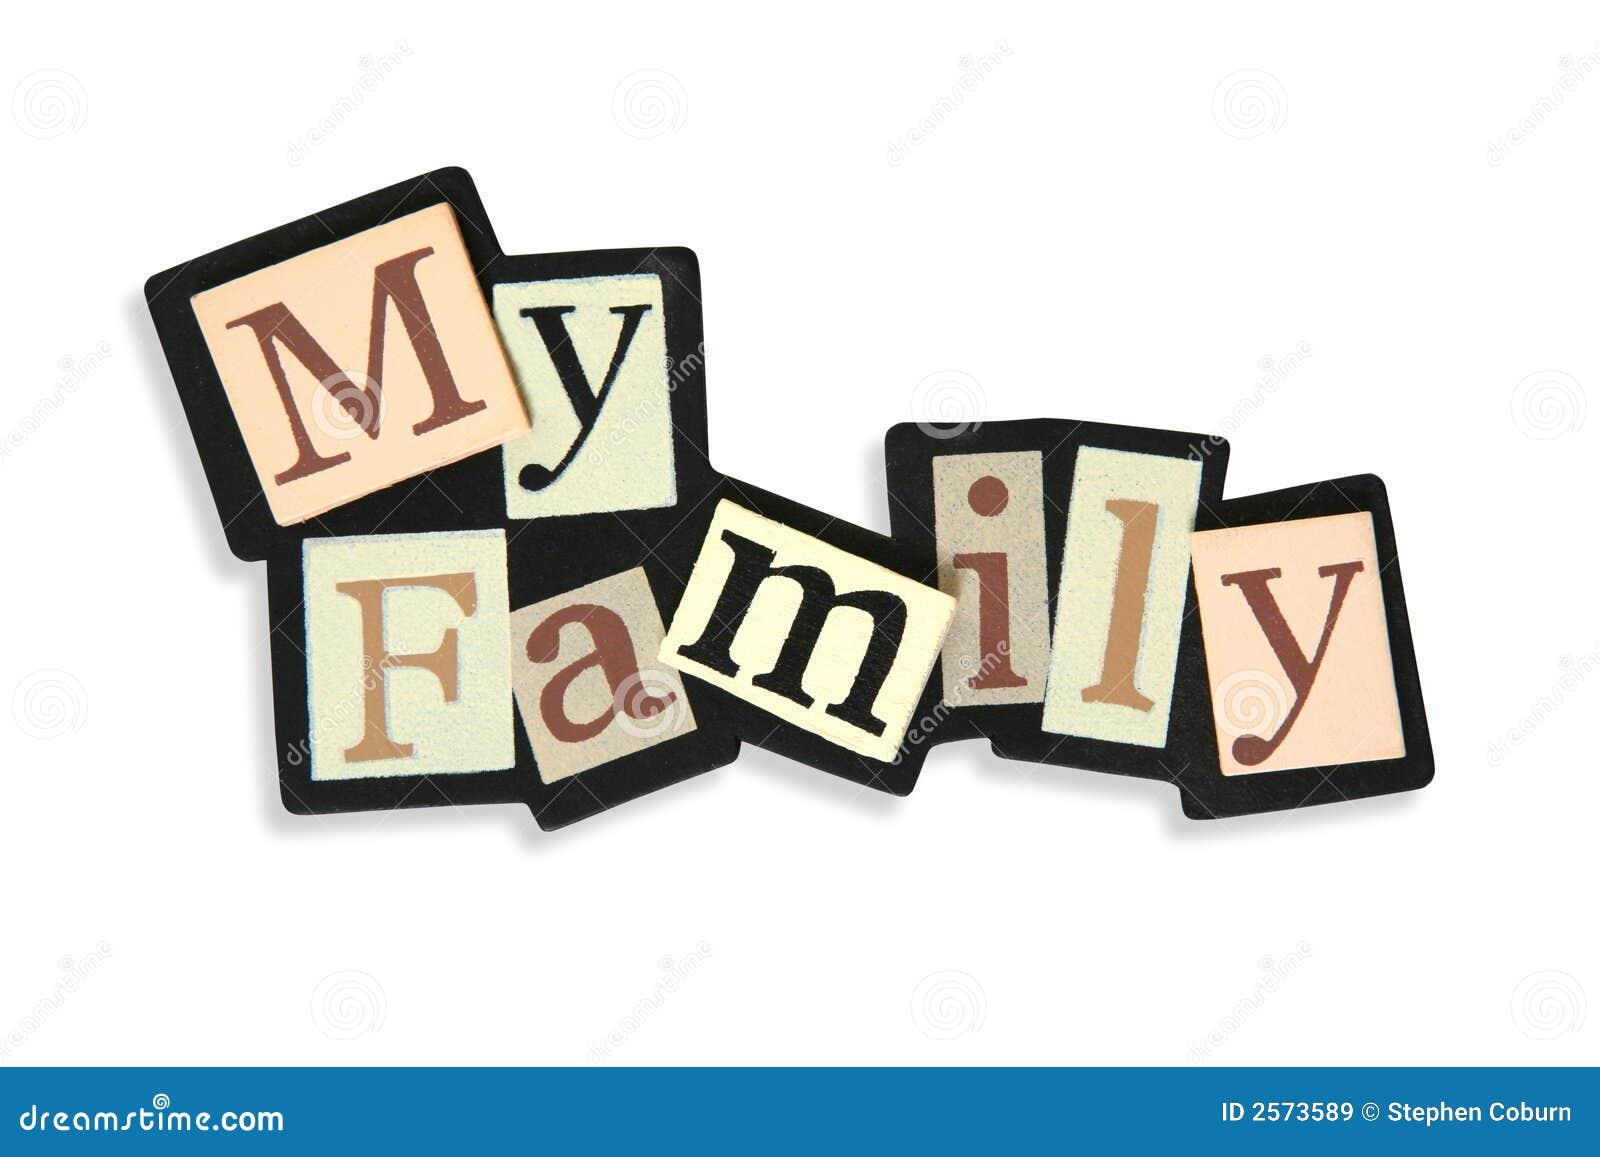 word family clipart - photo #41